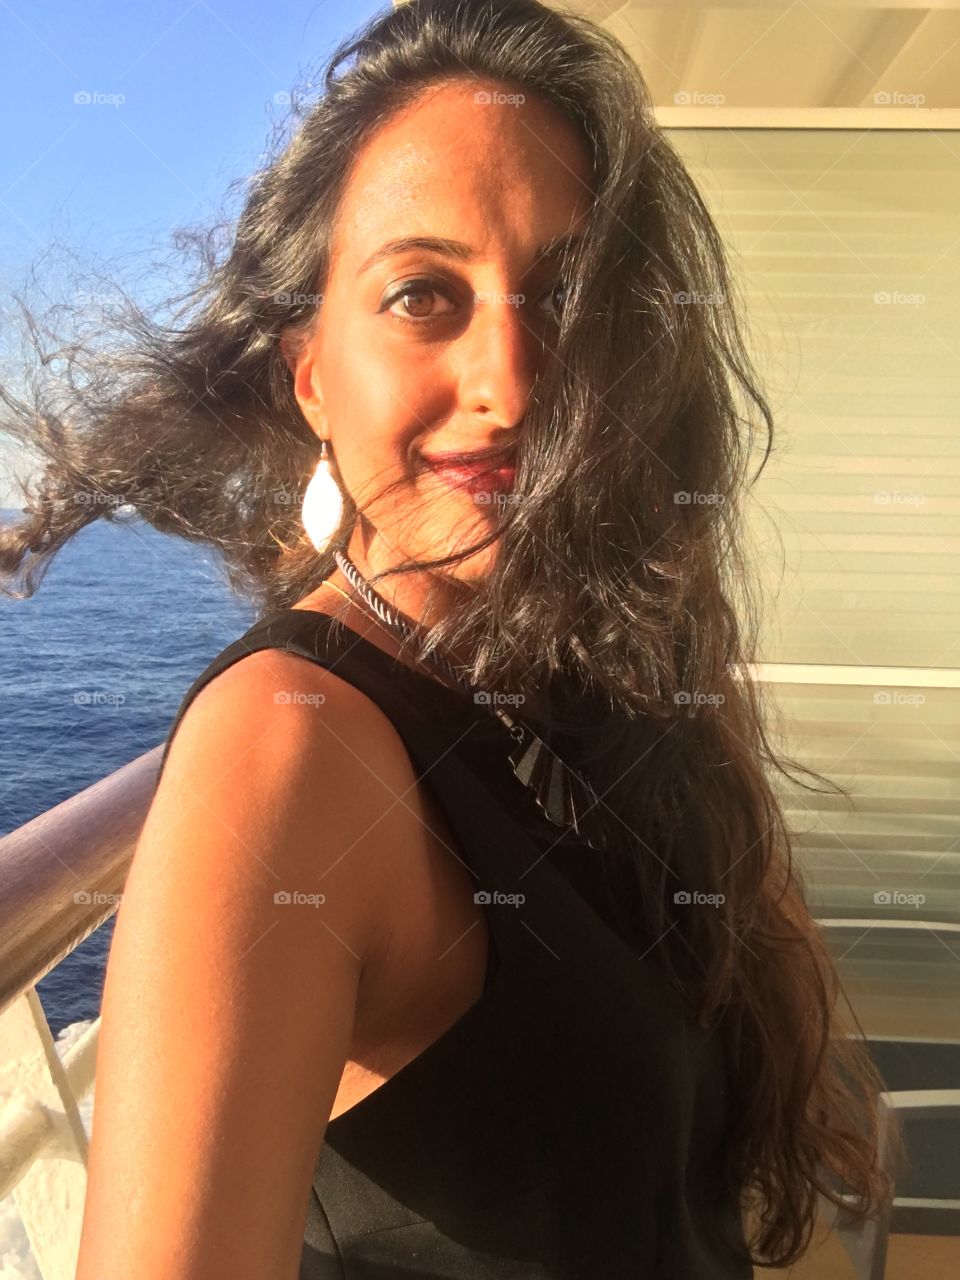 The wind in your hair as the ship takes you away. The salt from the water clings to the skin, its smell permeating every aspect of the body. The hair flies everywhere but who cares. To be with nature is to be connected. Find bliss in nature